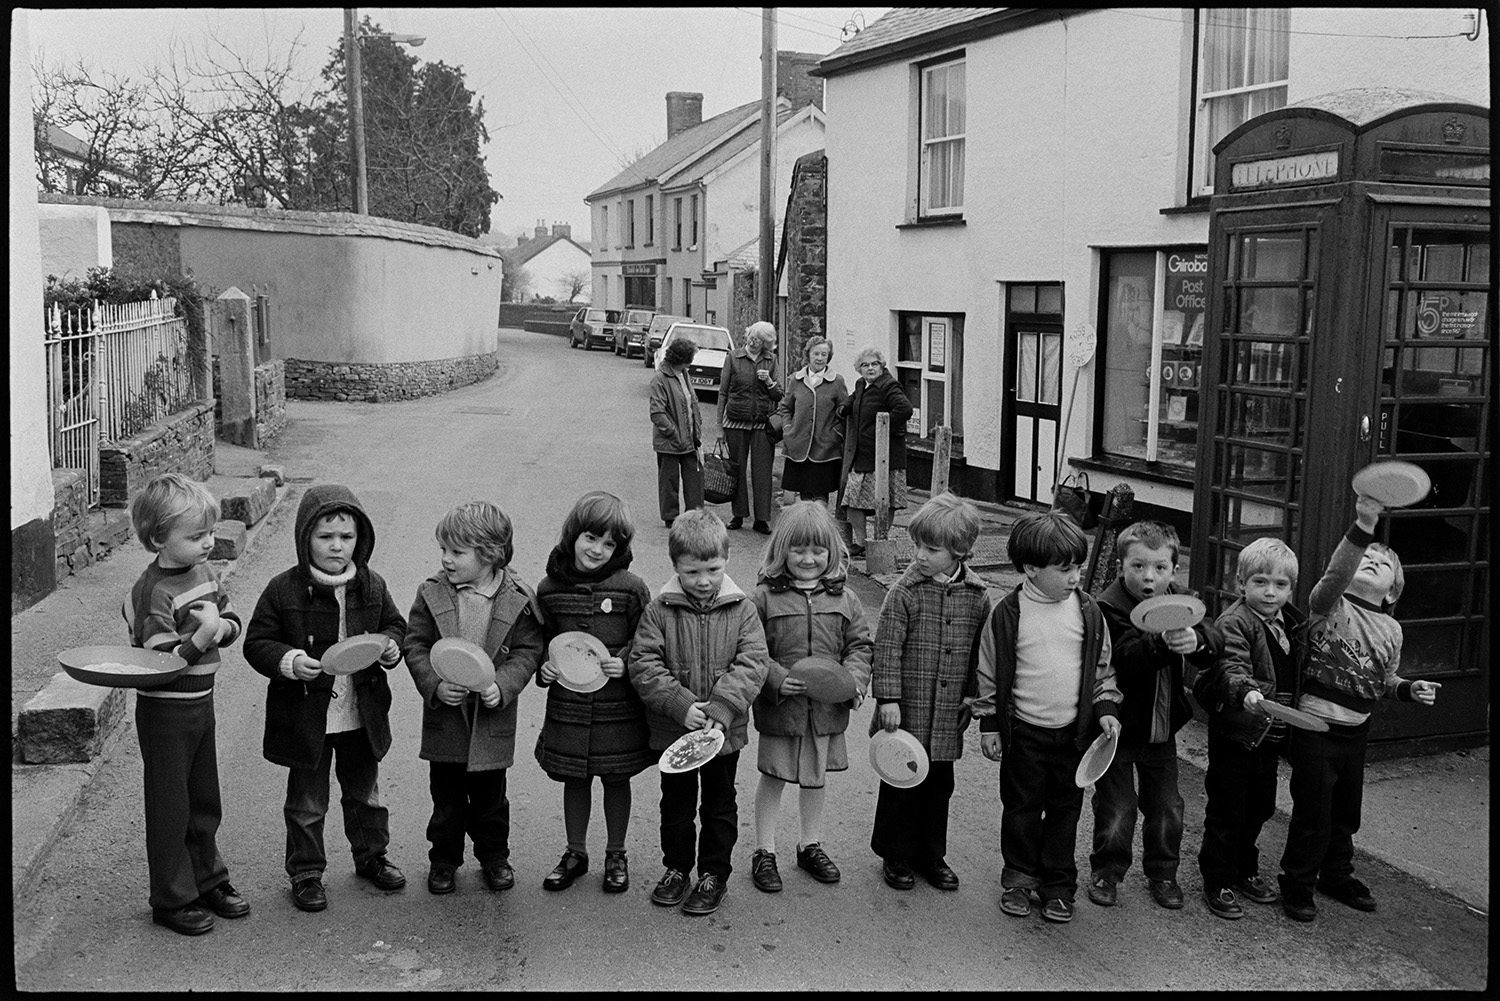 Children and parents at Pancake Race in village street.
[Children lining up by the telephone box in Fore Street, Dolton for a pancake race. A group of women are chatting in the background.]